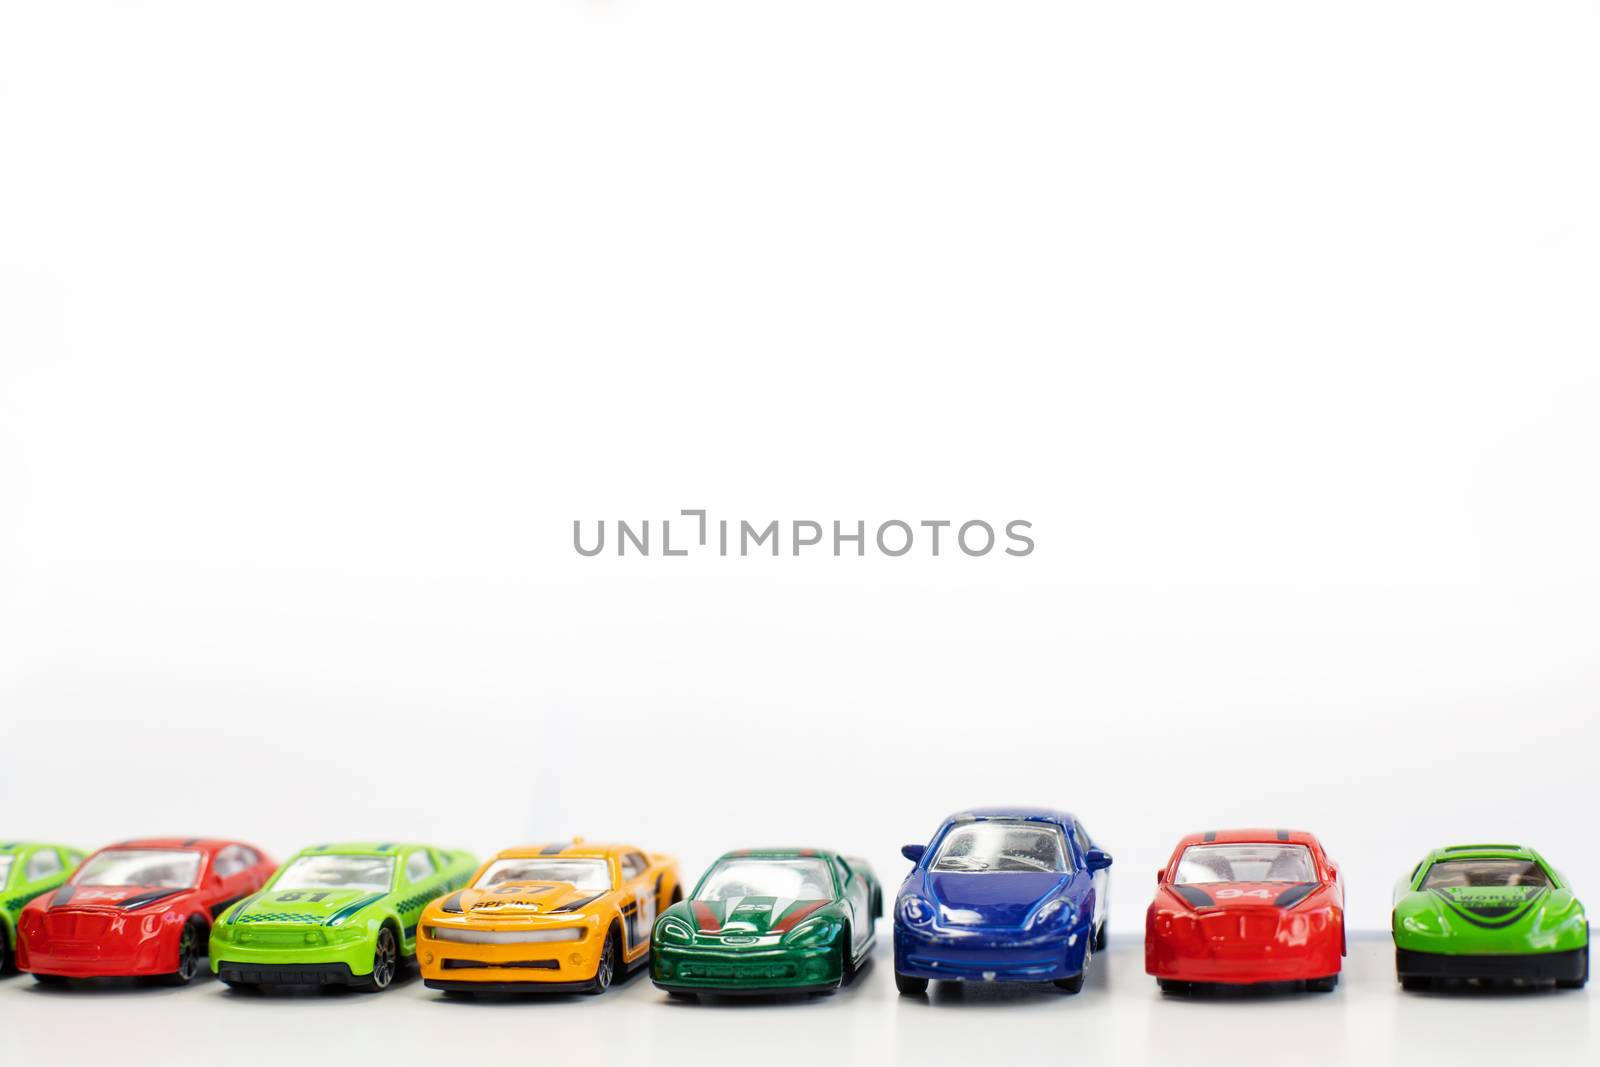 Toy cars of different colors arranged on a white background.